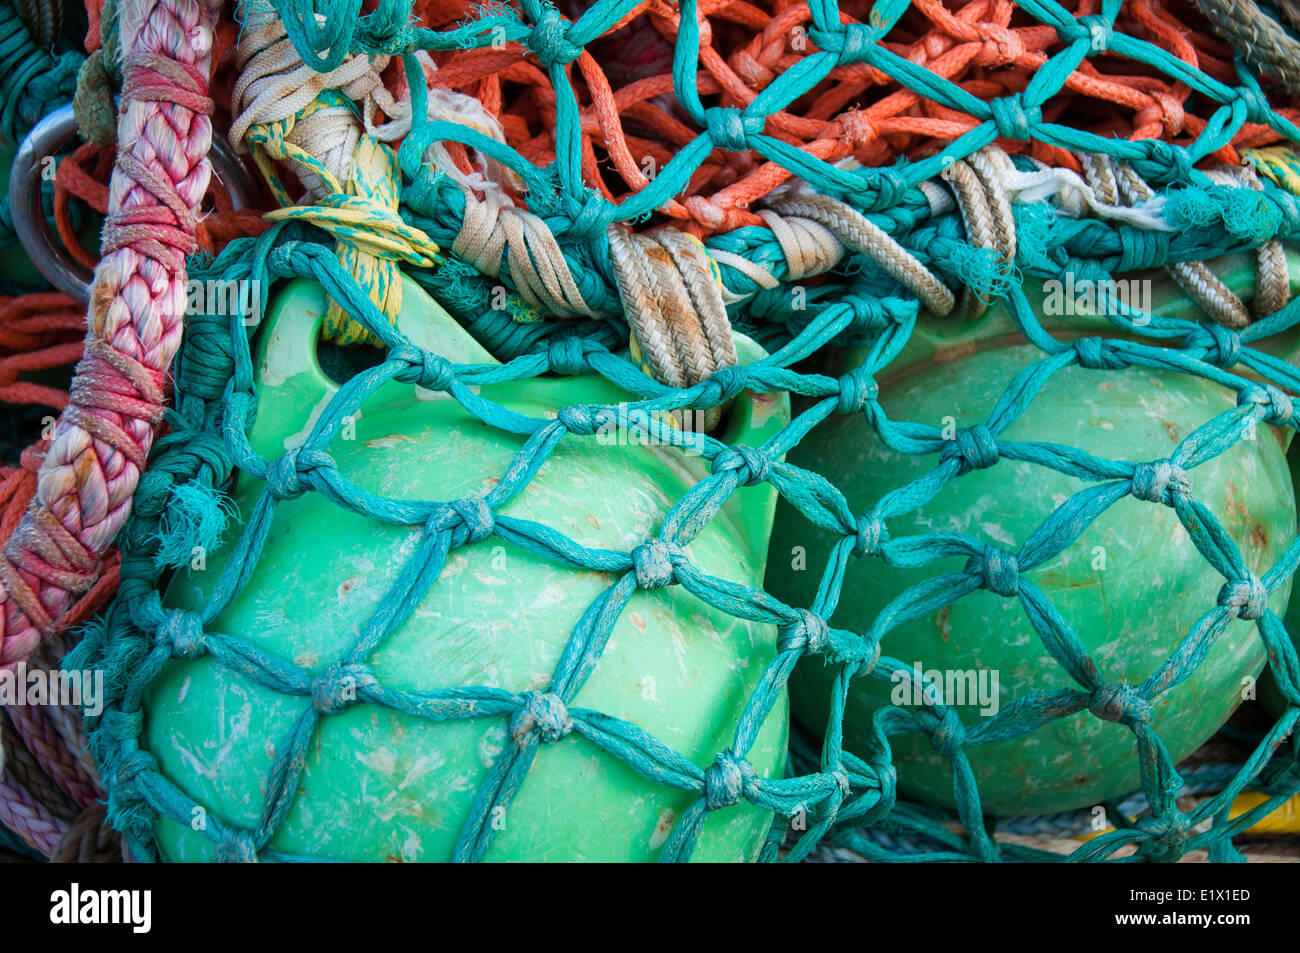 Close up of colourful coiled fishnig nets and floats Steveston, British Columbia, Canada Stock Photo